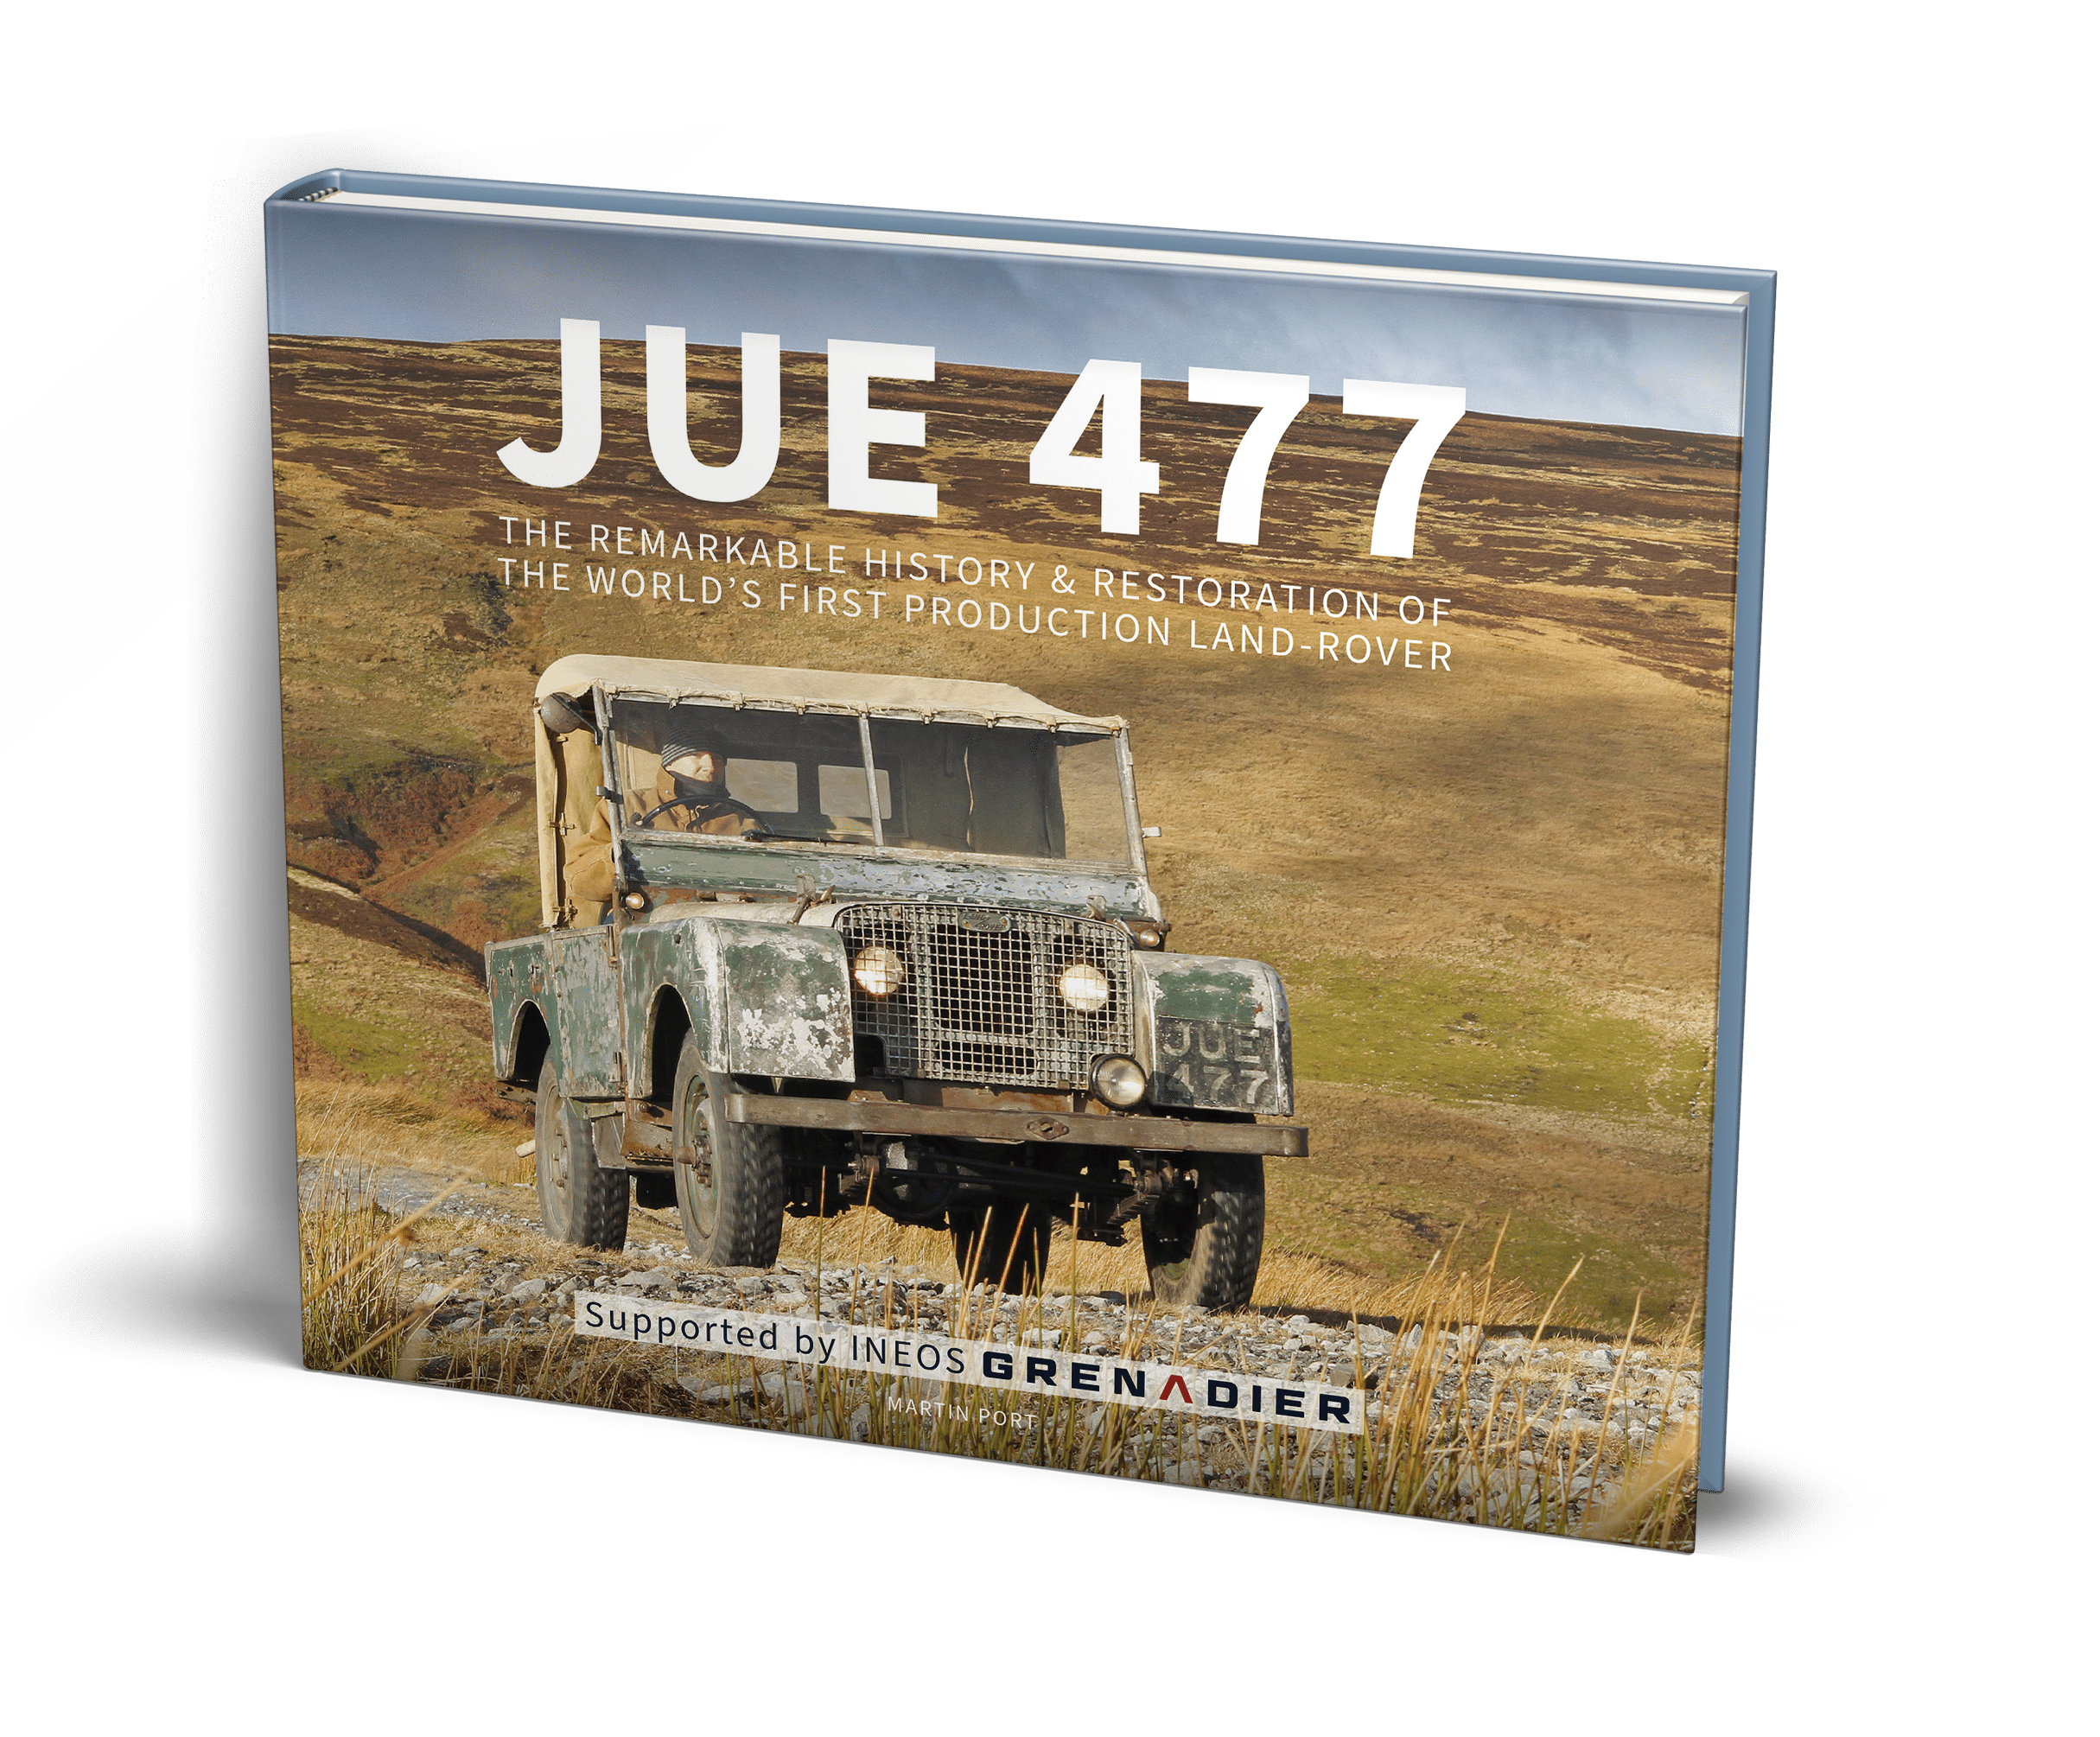 JUE 477 - The world’s first production Land-Rover, Porter Press books,